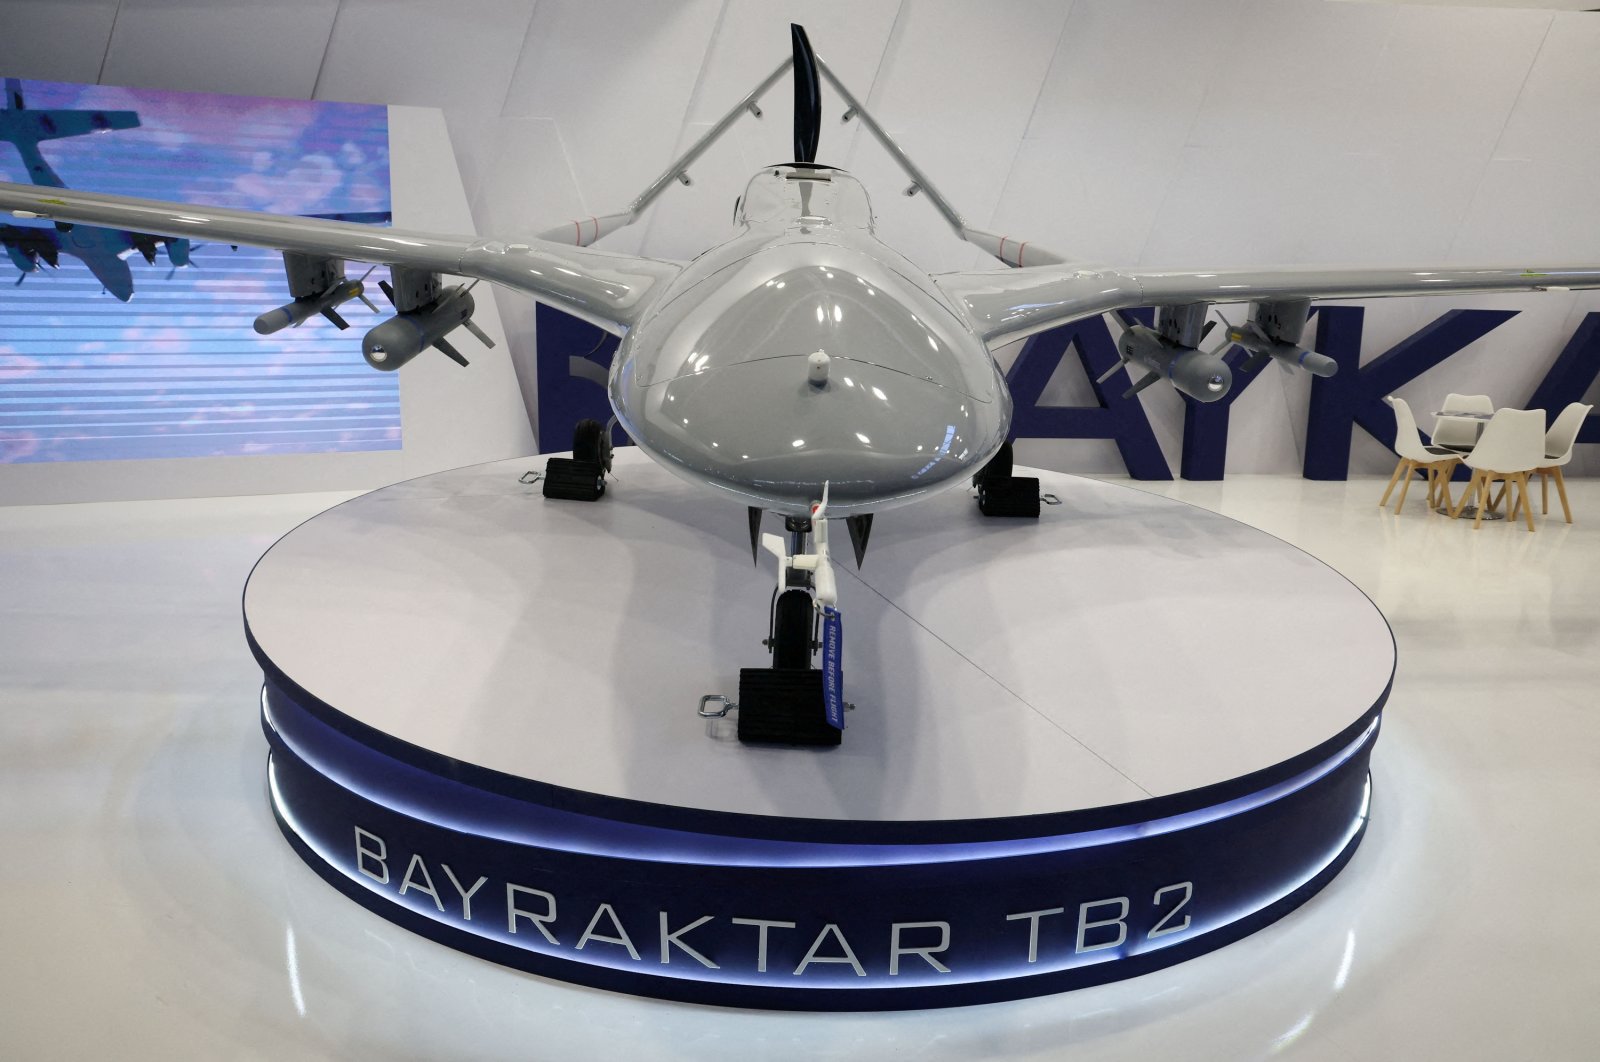 A Bayraktar TB2 is on display near the logo of the Turkish defense company Baykar inside a hall of the 30th International Defence Industry Exhibition in Kielce, Poland, Sept. 5, 2022. (Reuters Photo)